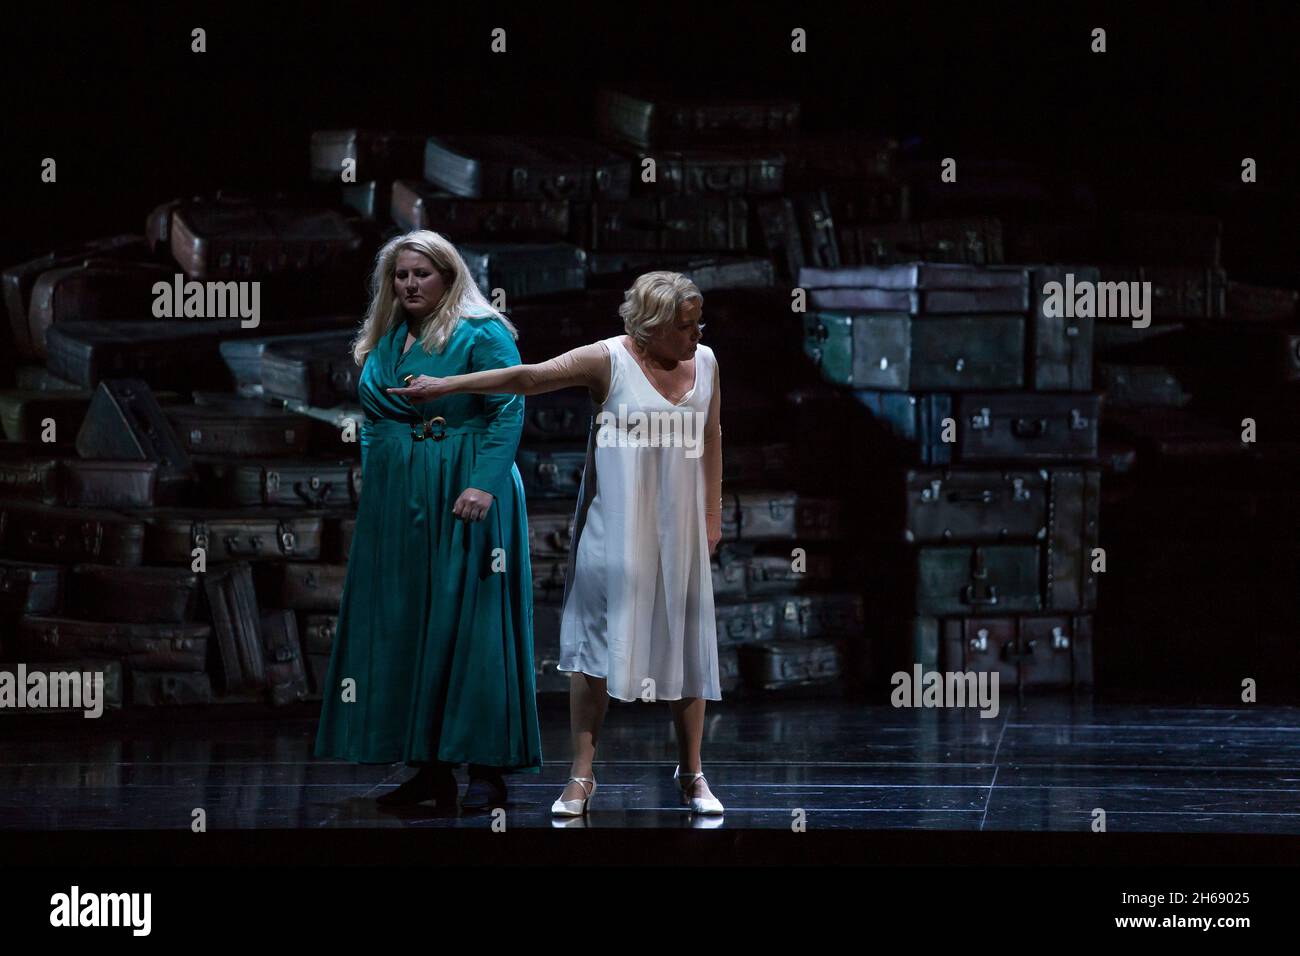 Berlin, Germany. 14th Oct, 2021. Karis Tucker (l) as Wellgunde and Nina Stemme as Brünnhilde stand on stage during a rehearsal for the Wagner opera 'Götterdämmerung' at the Deutsche Oper Berlin. Credit: Nina Hansch/dpa/Alamy Live News Stock Photo